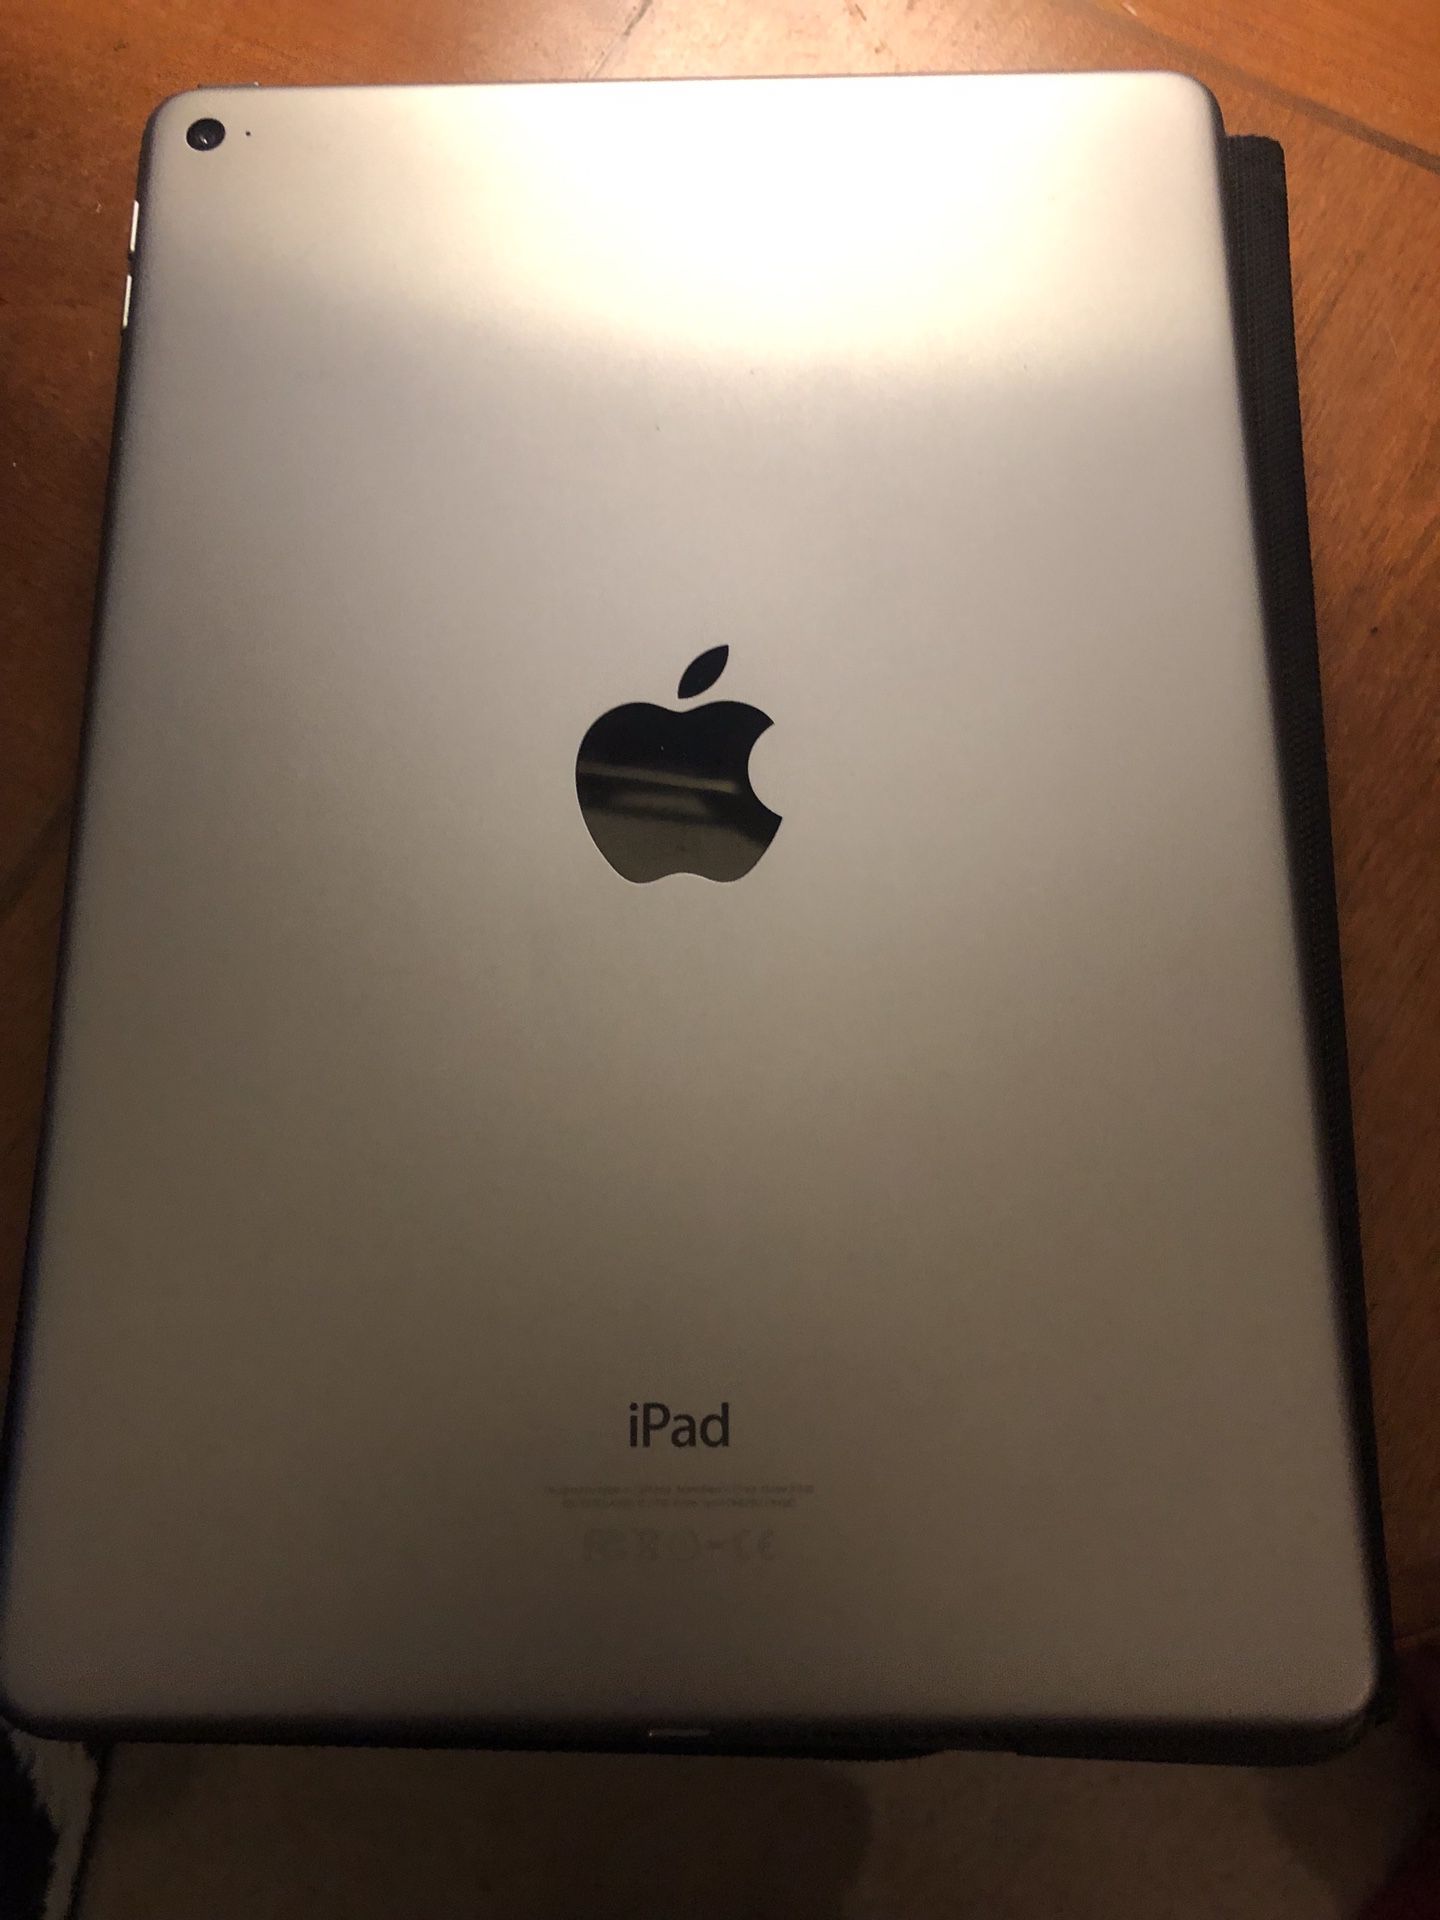 iPad Air 2, 32 gb, WiFi only- comes with charger and keyboard